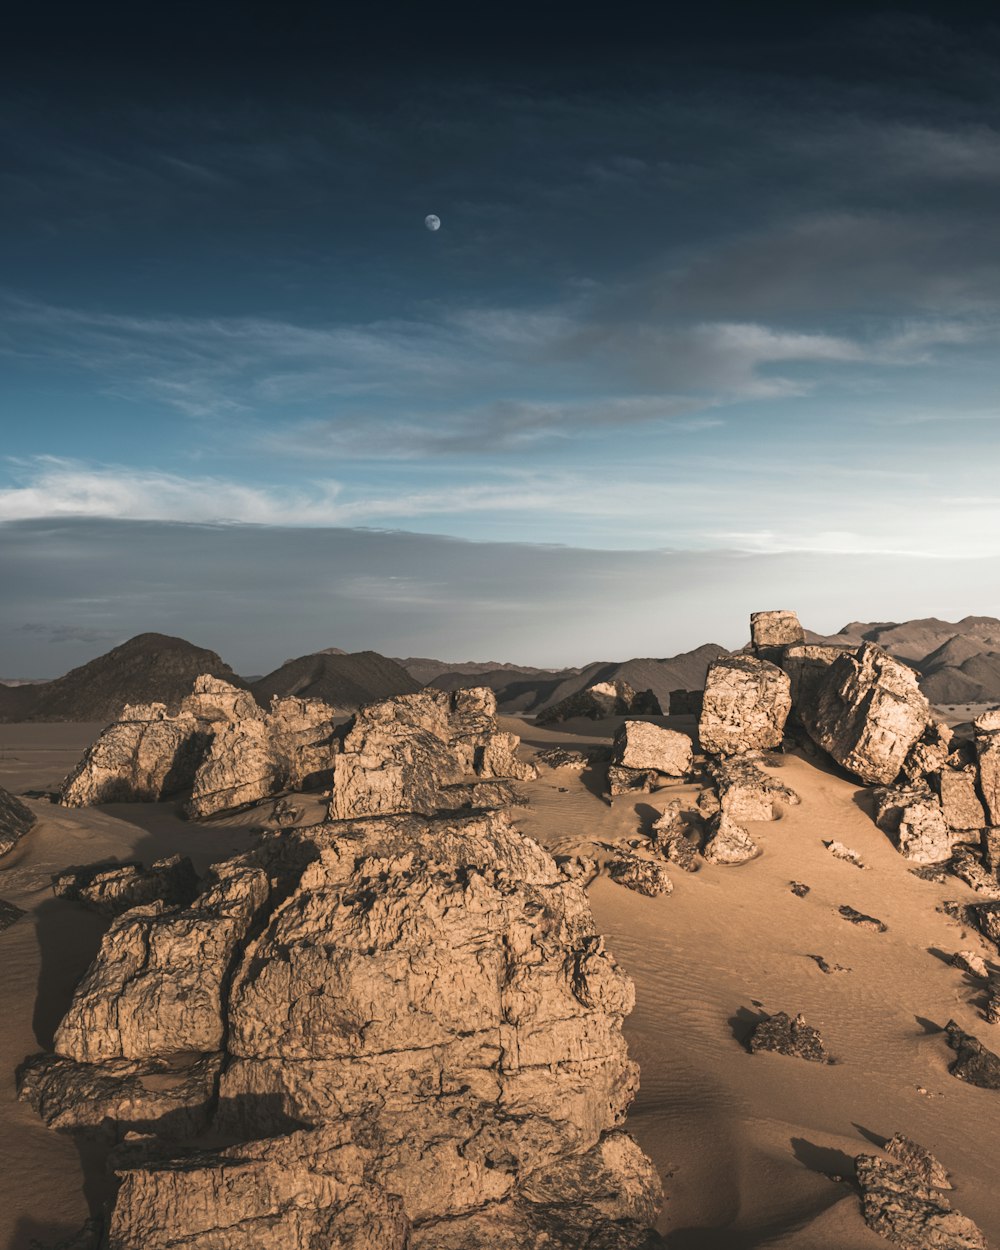 a desert landscape with rocks and a moon in the sky